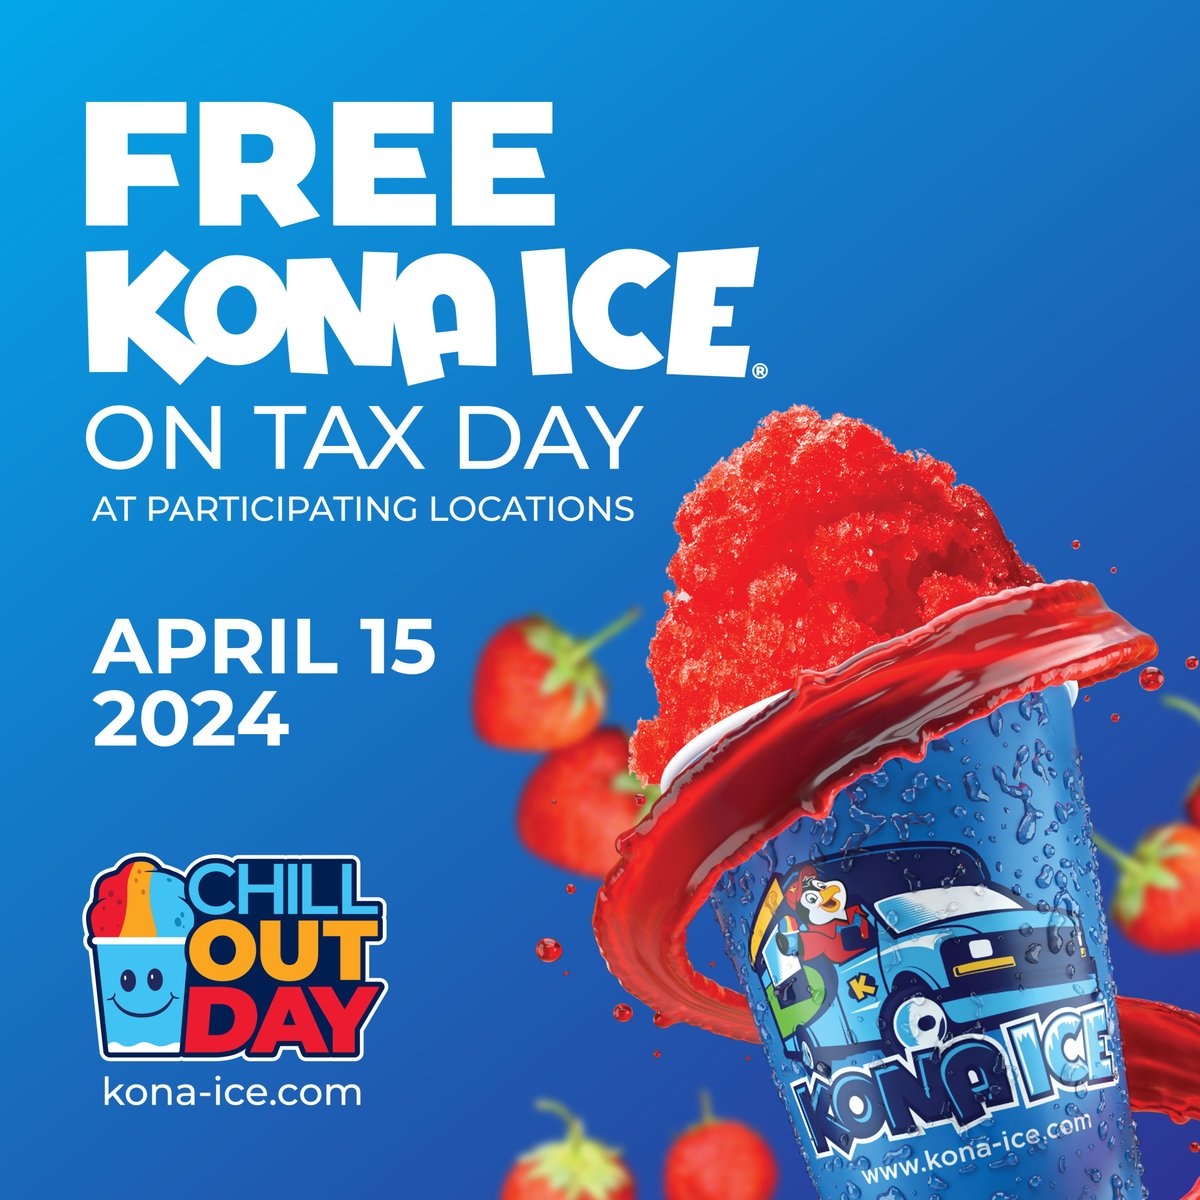 No Taxation without Relaxation! Head over to kona-ice.com/chill-out-day/ to find your local truck for a FREE Kona Ice today only! 🍧💸